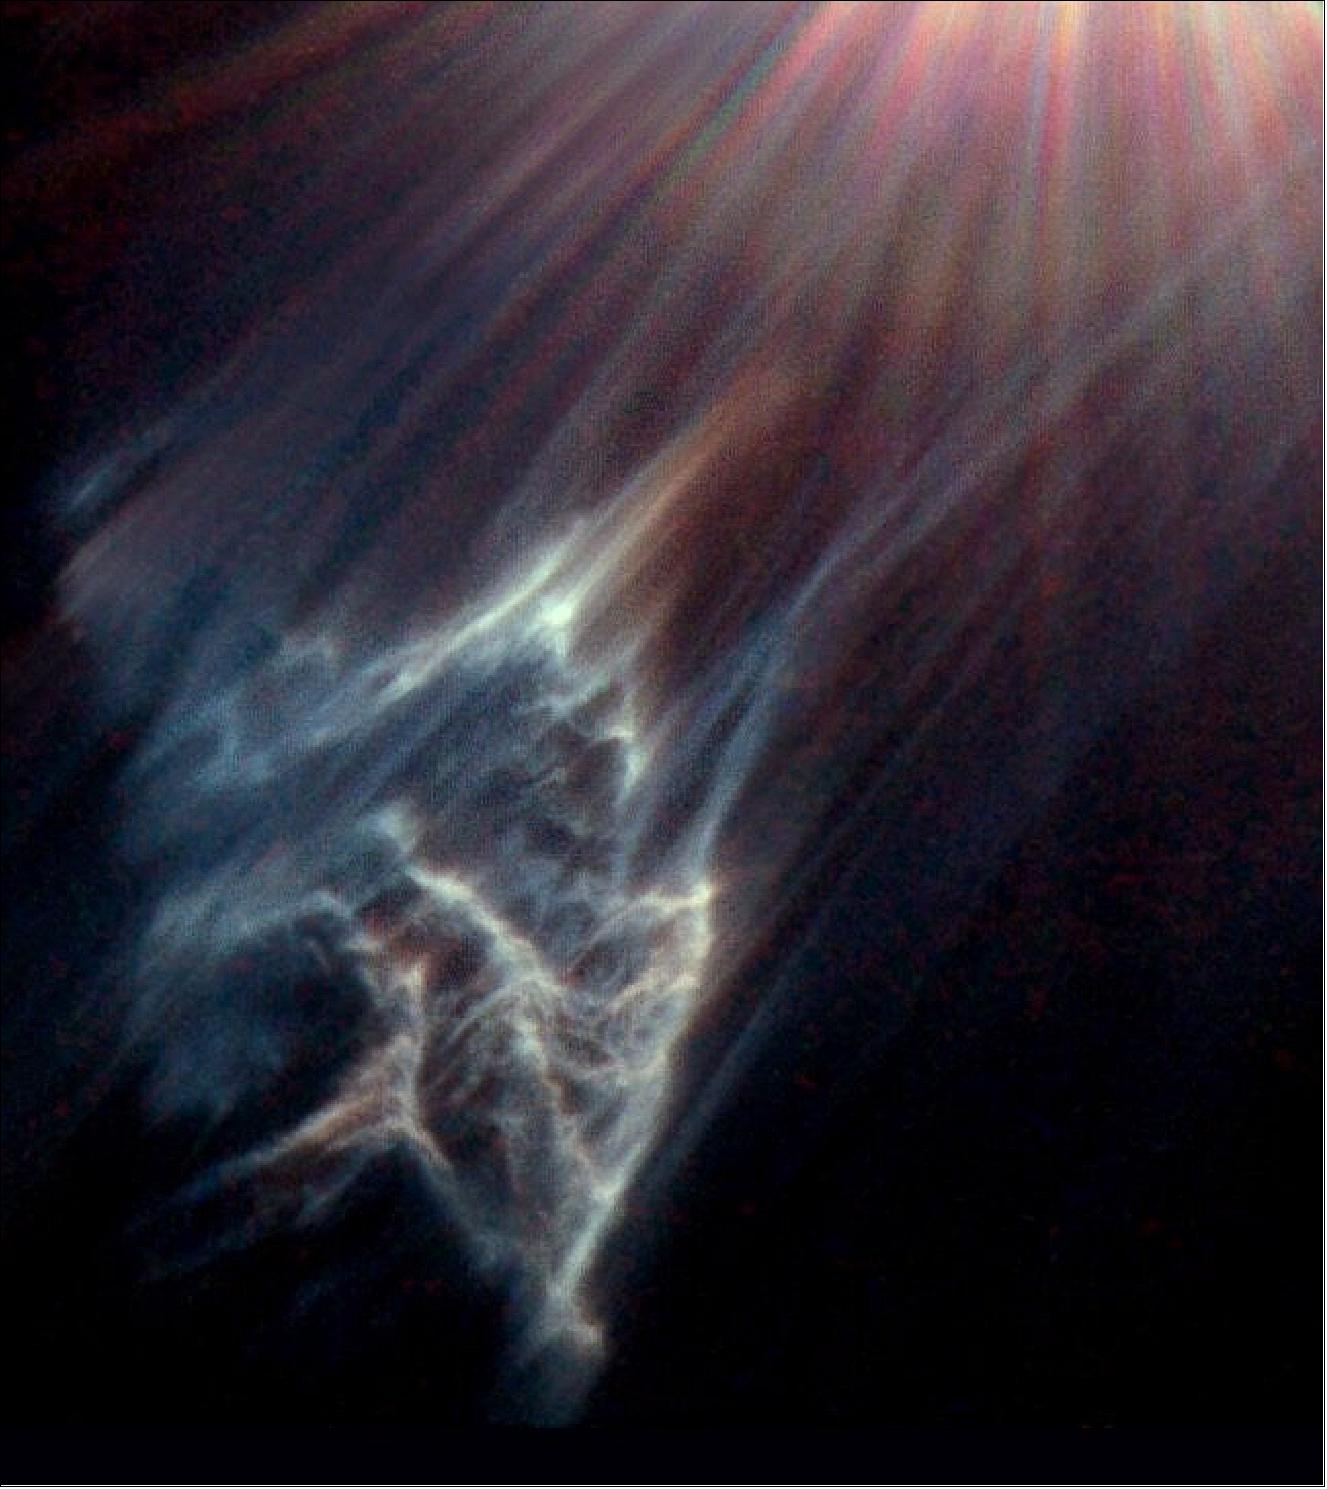 Figure 12: This ghostly image shows what can happen when an interstellar cloud passes too close to a star. Barnard's Merope Nebula, also known as IC 349, is a cloud of interstellar gas and dust travelling through the Pleiades star cluster at a relative speed of 11 km/s. It is passing close to the star Merope, located 0.06 light years away from the cloud, which is equivalent to about 3 500 times the distance between the Earth and the Sun. This passage is disrupting the nebula and creating the wispy effect seen in the image [image credit: NASA/ESA and The Hubble Heritage Team (STScI/AURA), George Herbig and Theodore Simon (University of Hawaii)]